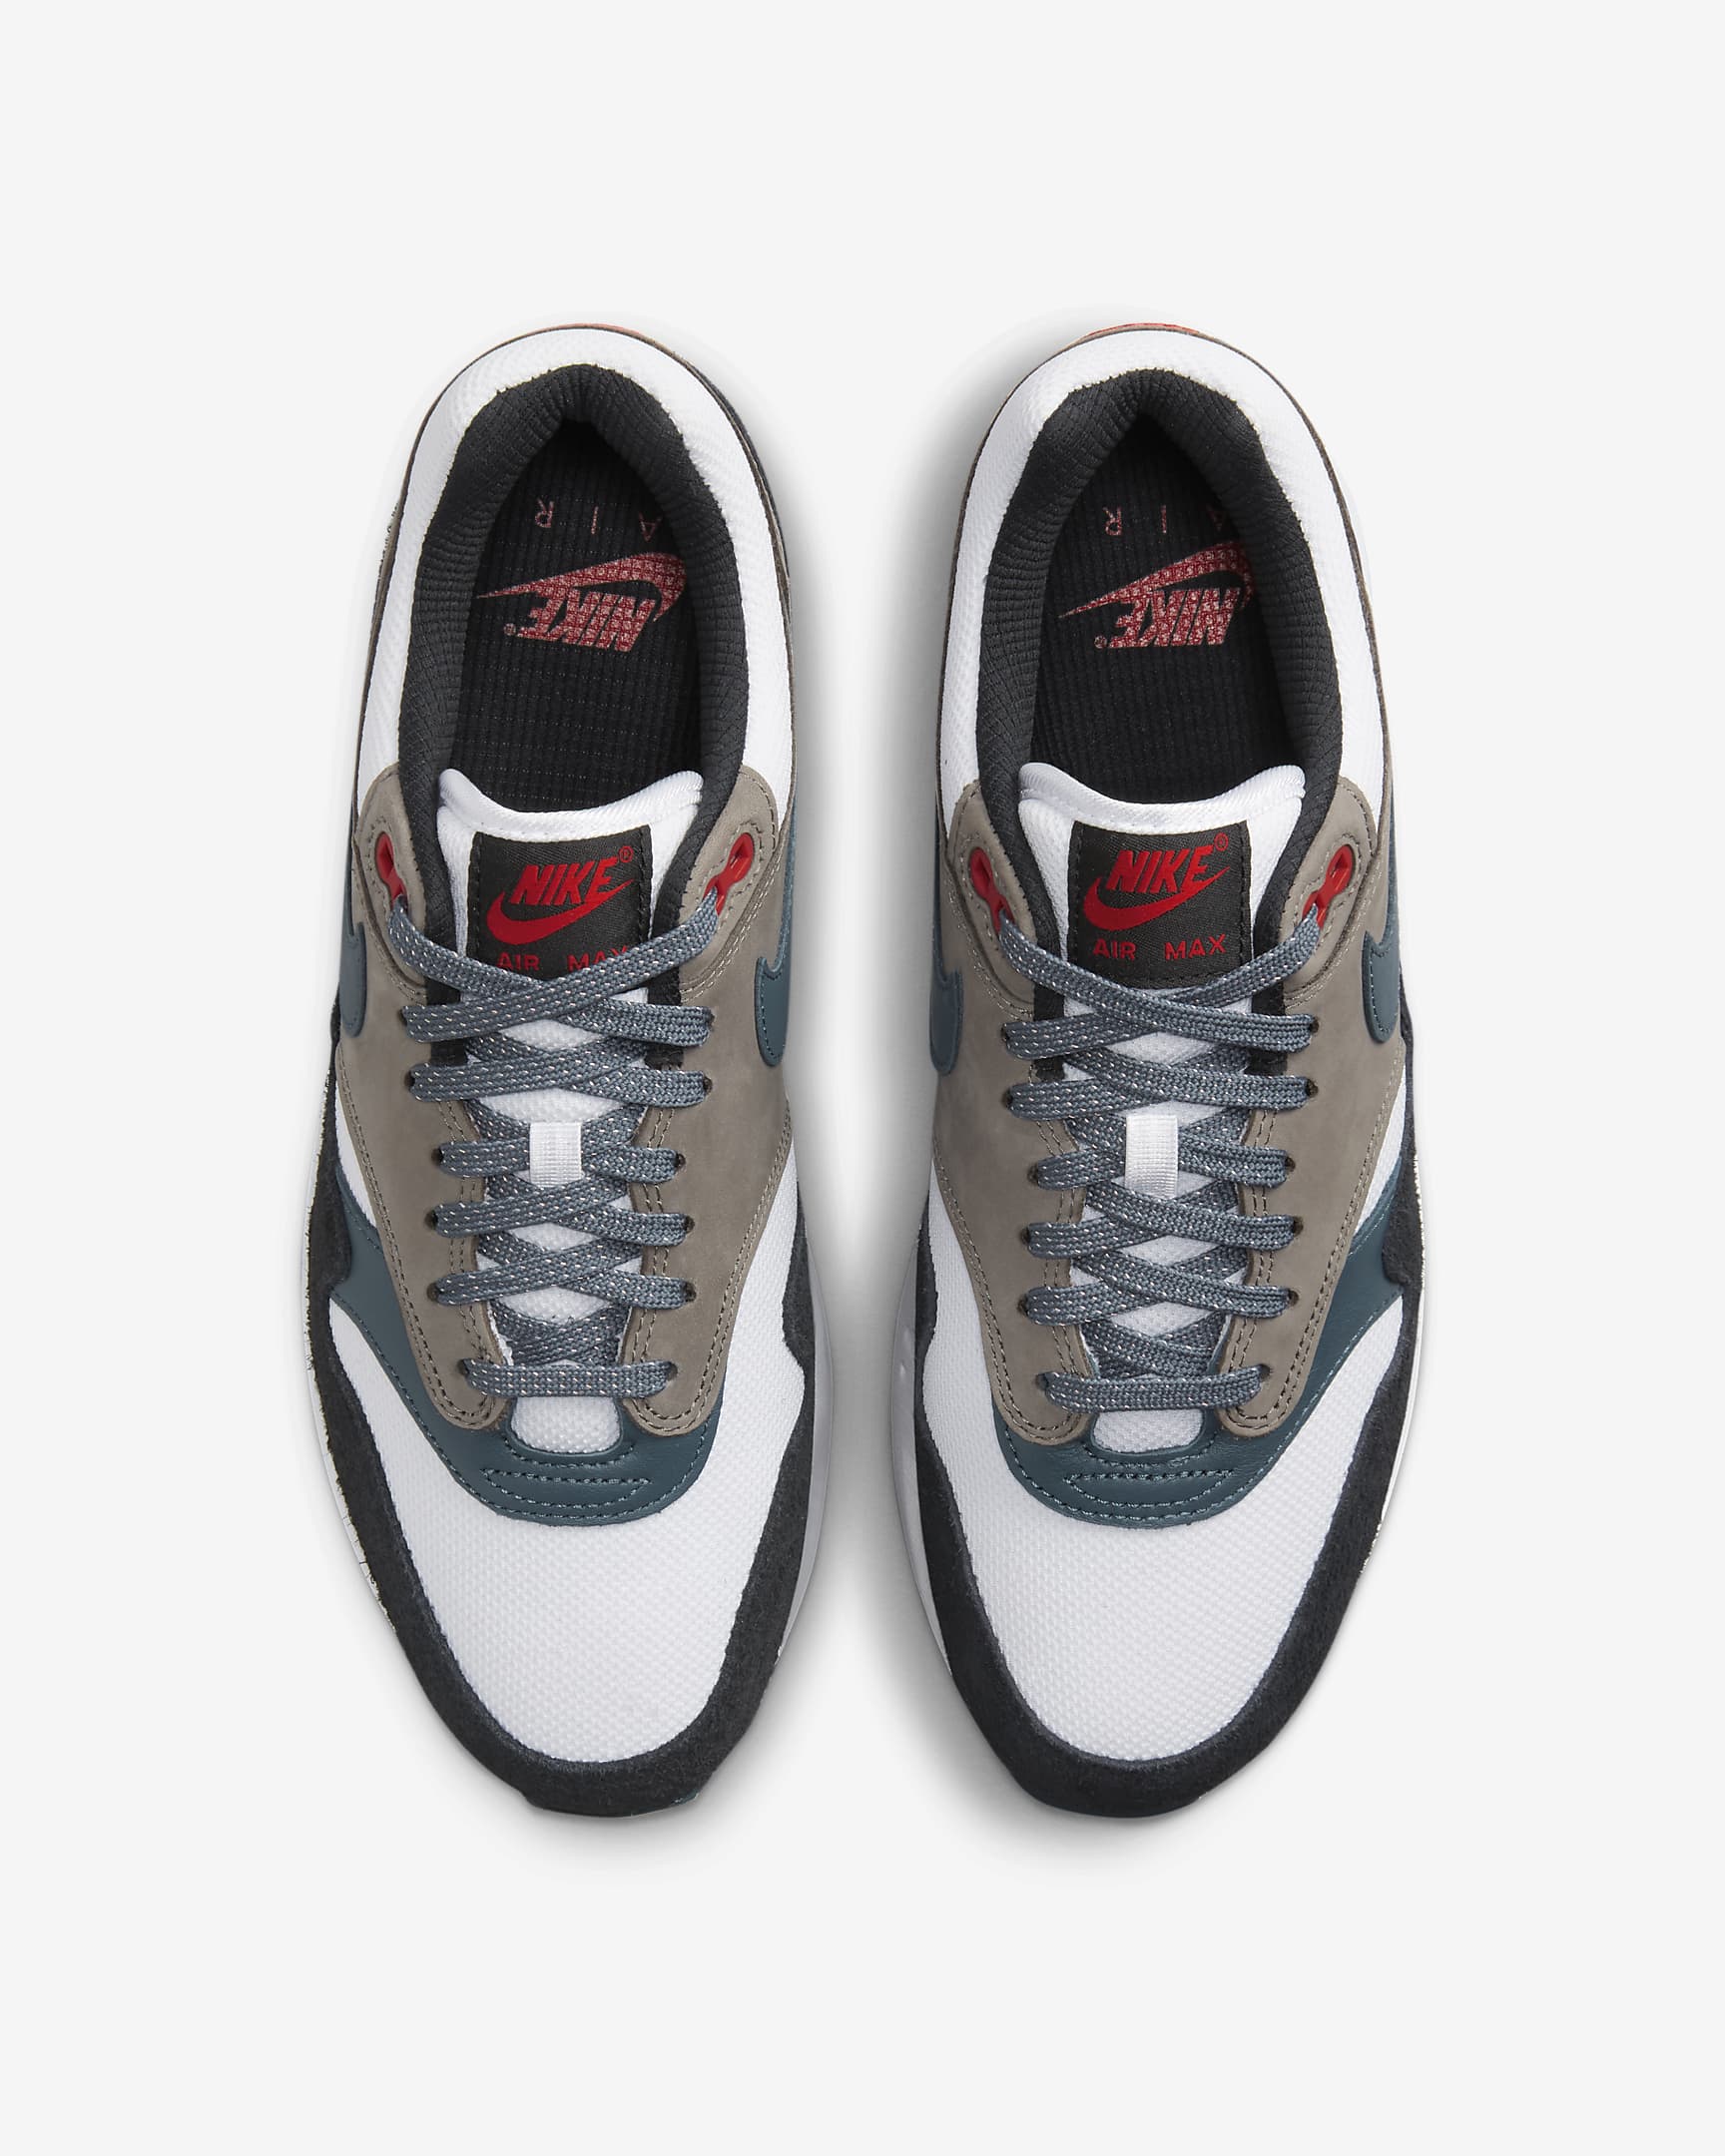 Sneakerhead Alert! Nike Air Max 1 Premium Men’s Shoes Review – The Epitome of Footwear Excellence!